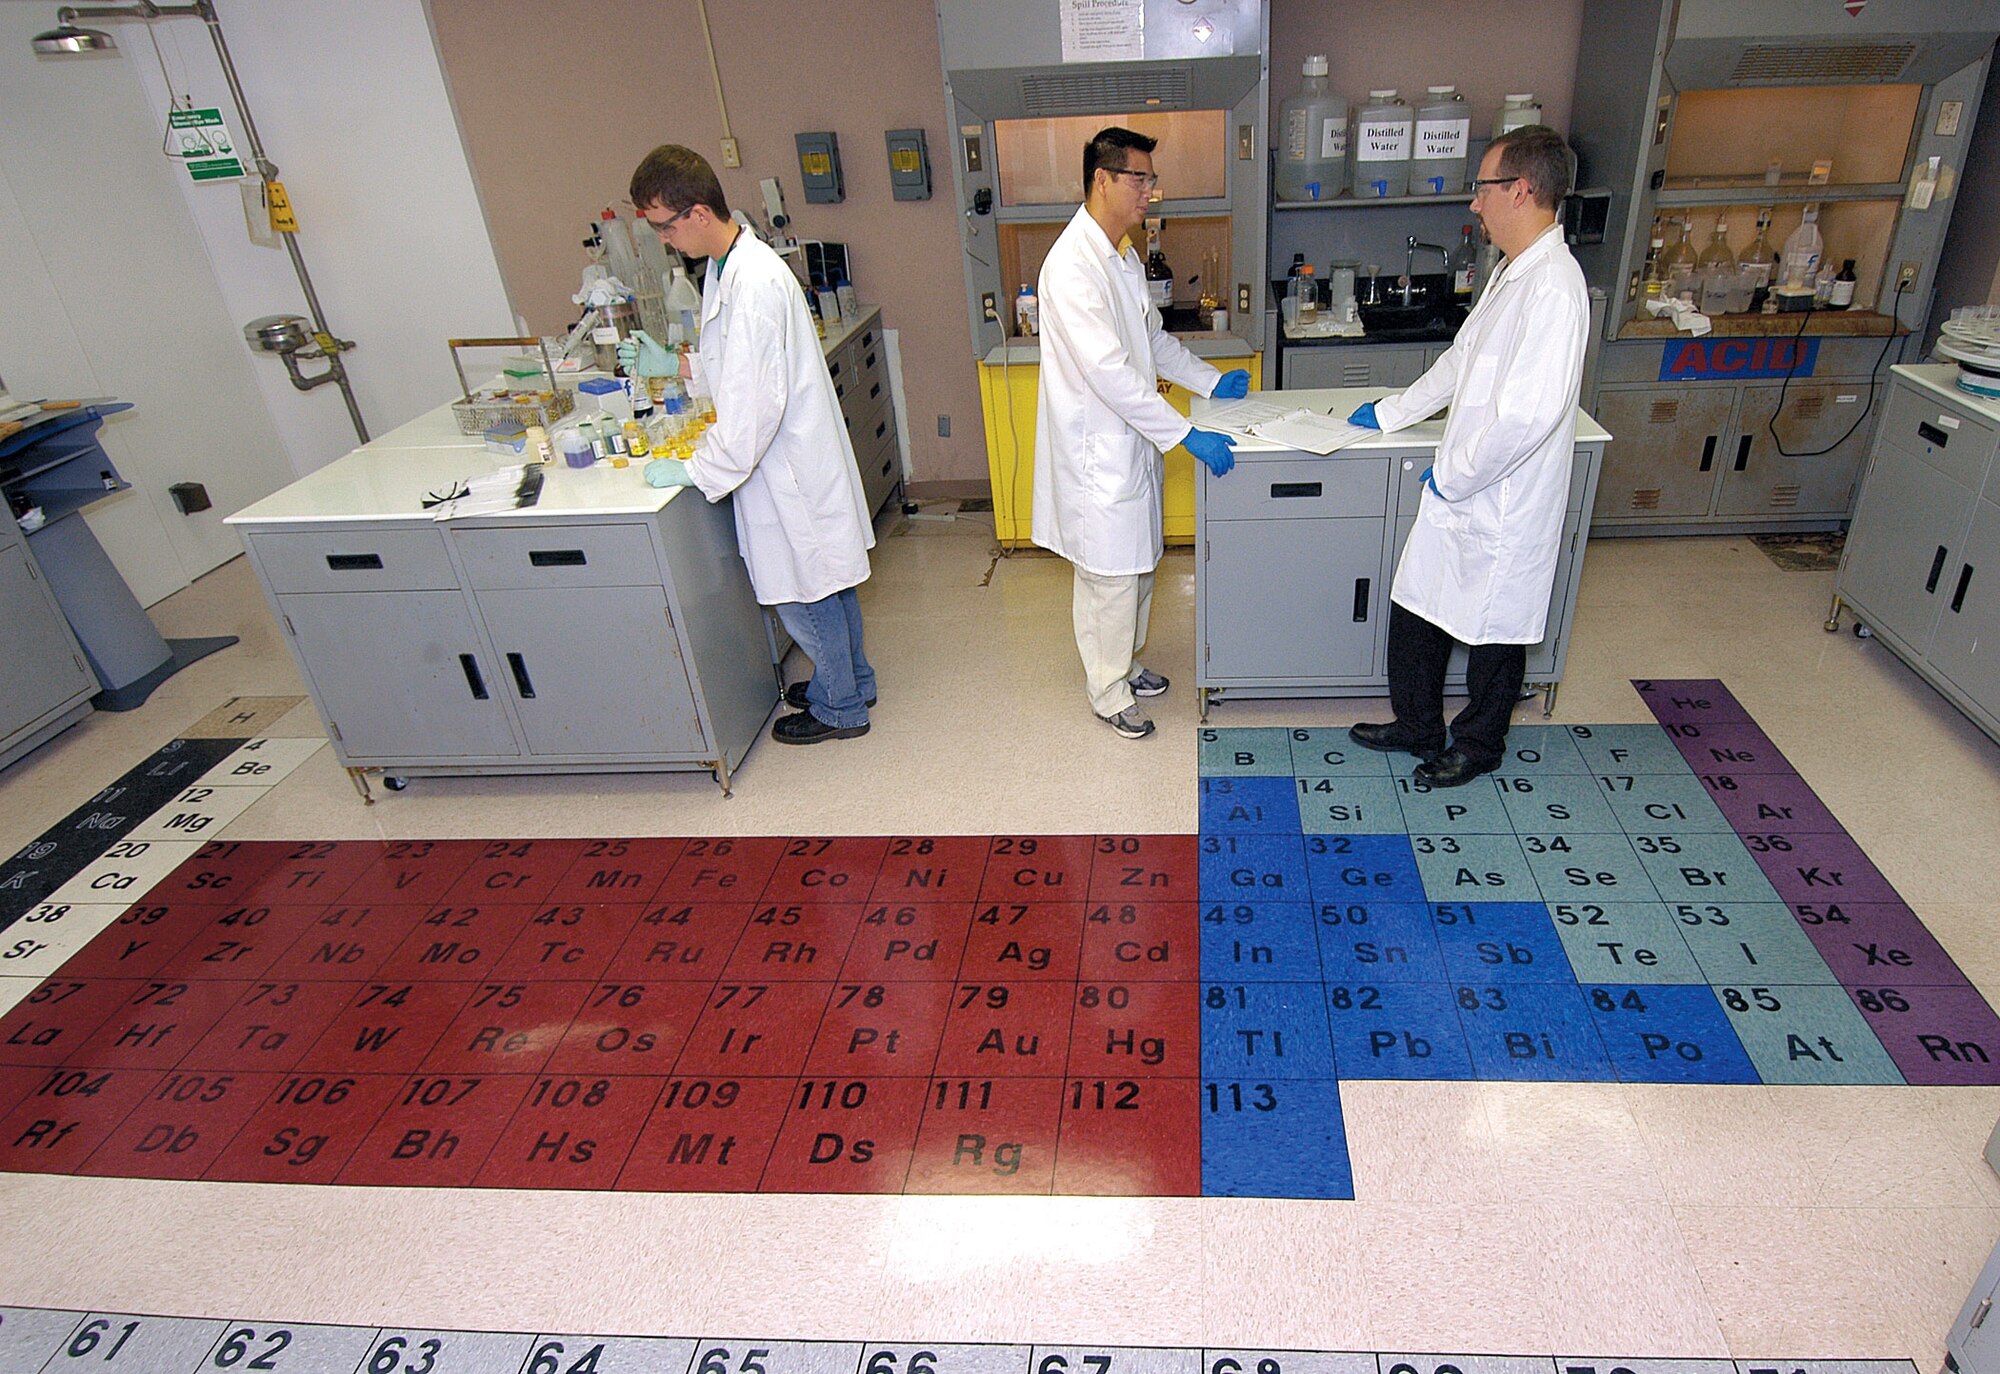 A colorful periodic table now graces the floor of the 76th Maintenance Wing Electroplating Lab, an idea of chemist Chris Mance, right, who did the work with help from chemist David Nguyen, center. Fellow chemist Carson Cameron, left, works in the open design that also now allows easier access to an emergency eye wash station. (Air Force photo by Margo Wright)